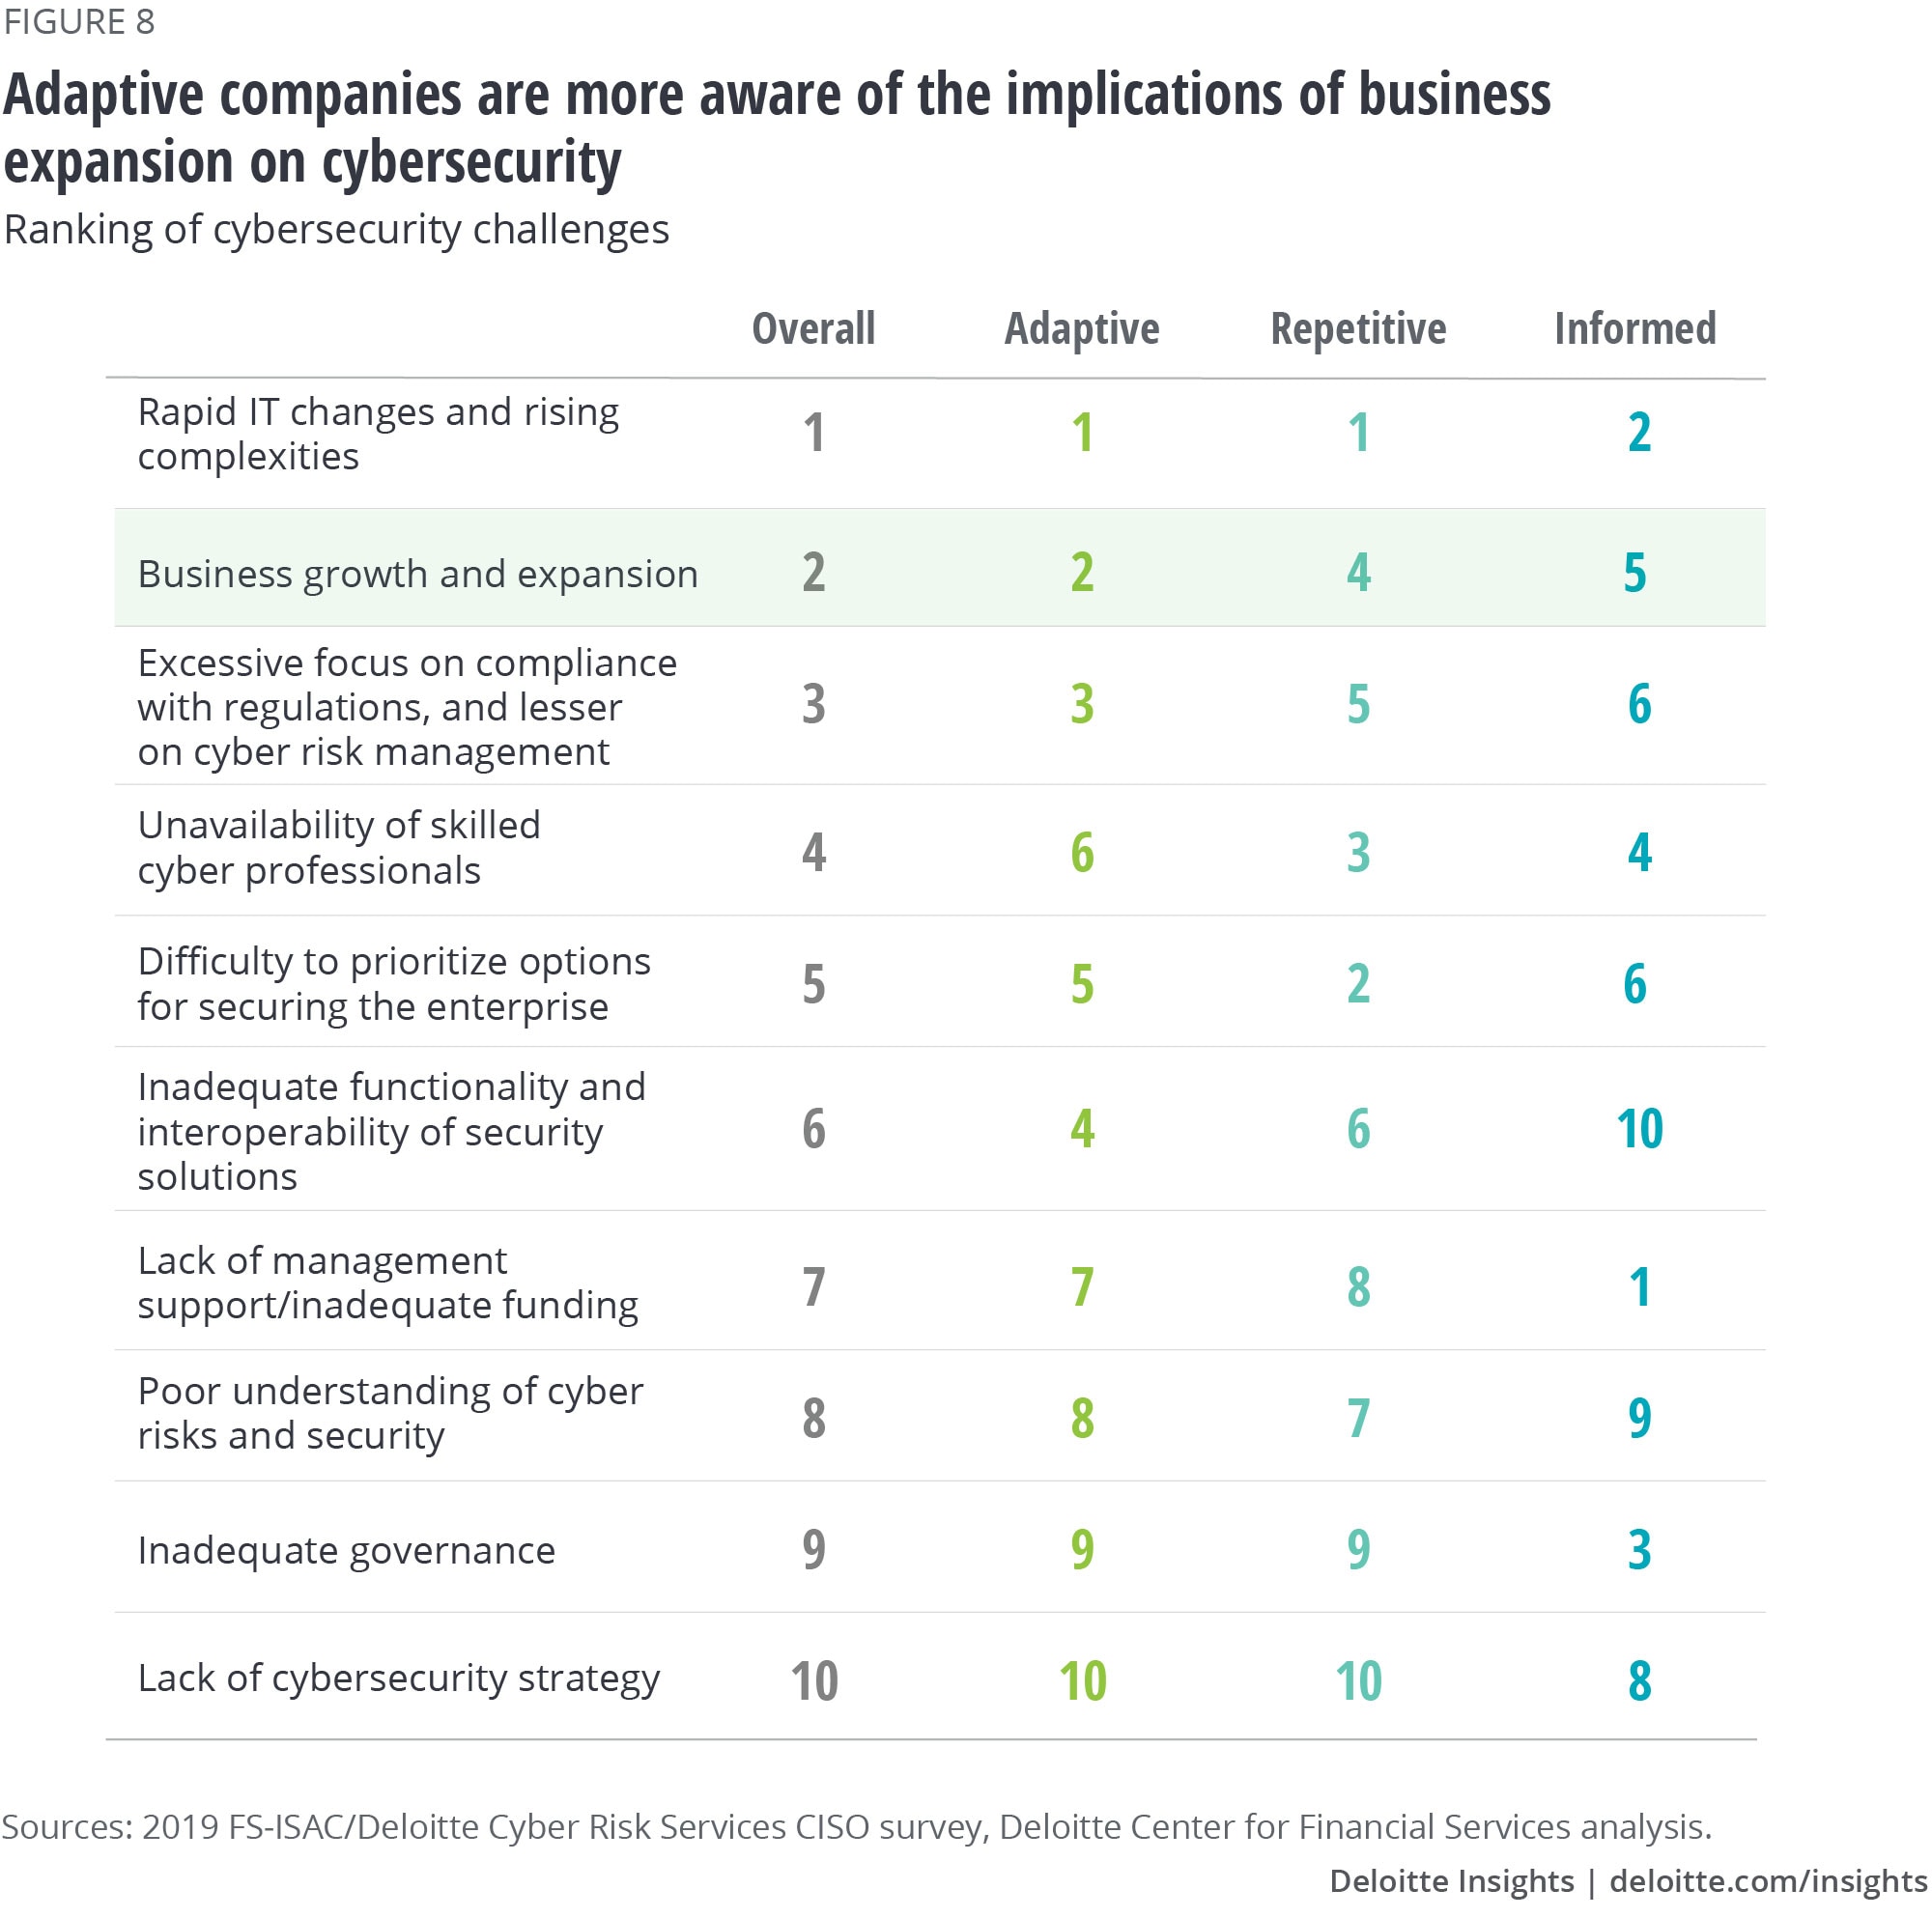 Adaptive companies are more aware of the implications of business expansion on cybersecurity